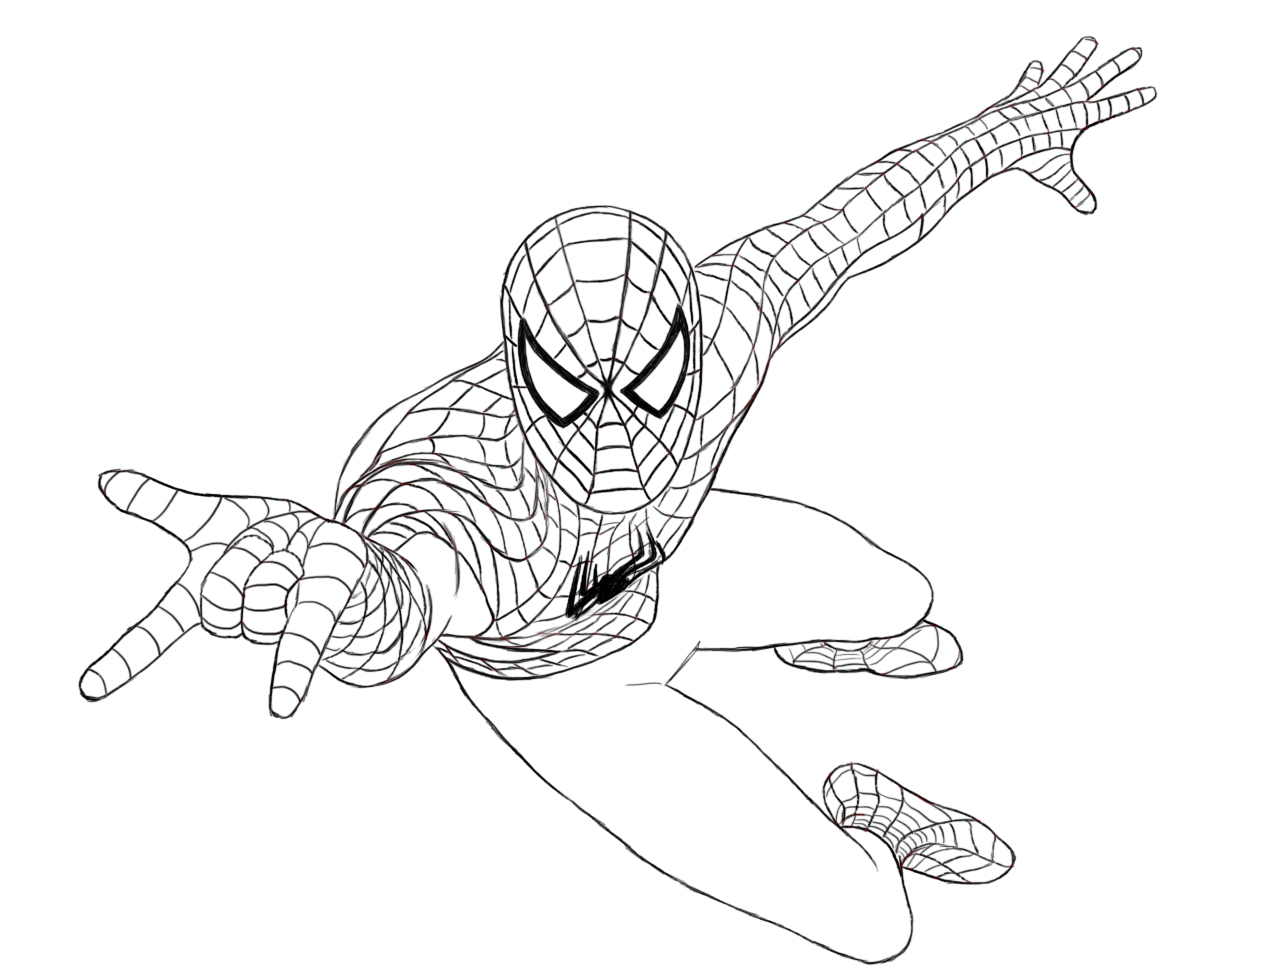  Spiderman Coloring pages | Coloring page | FREE Coloring pages for kids | #10